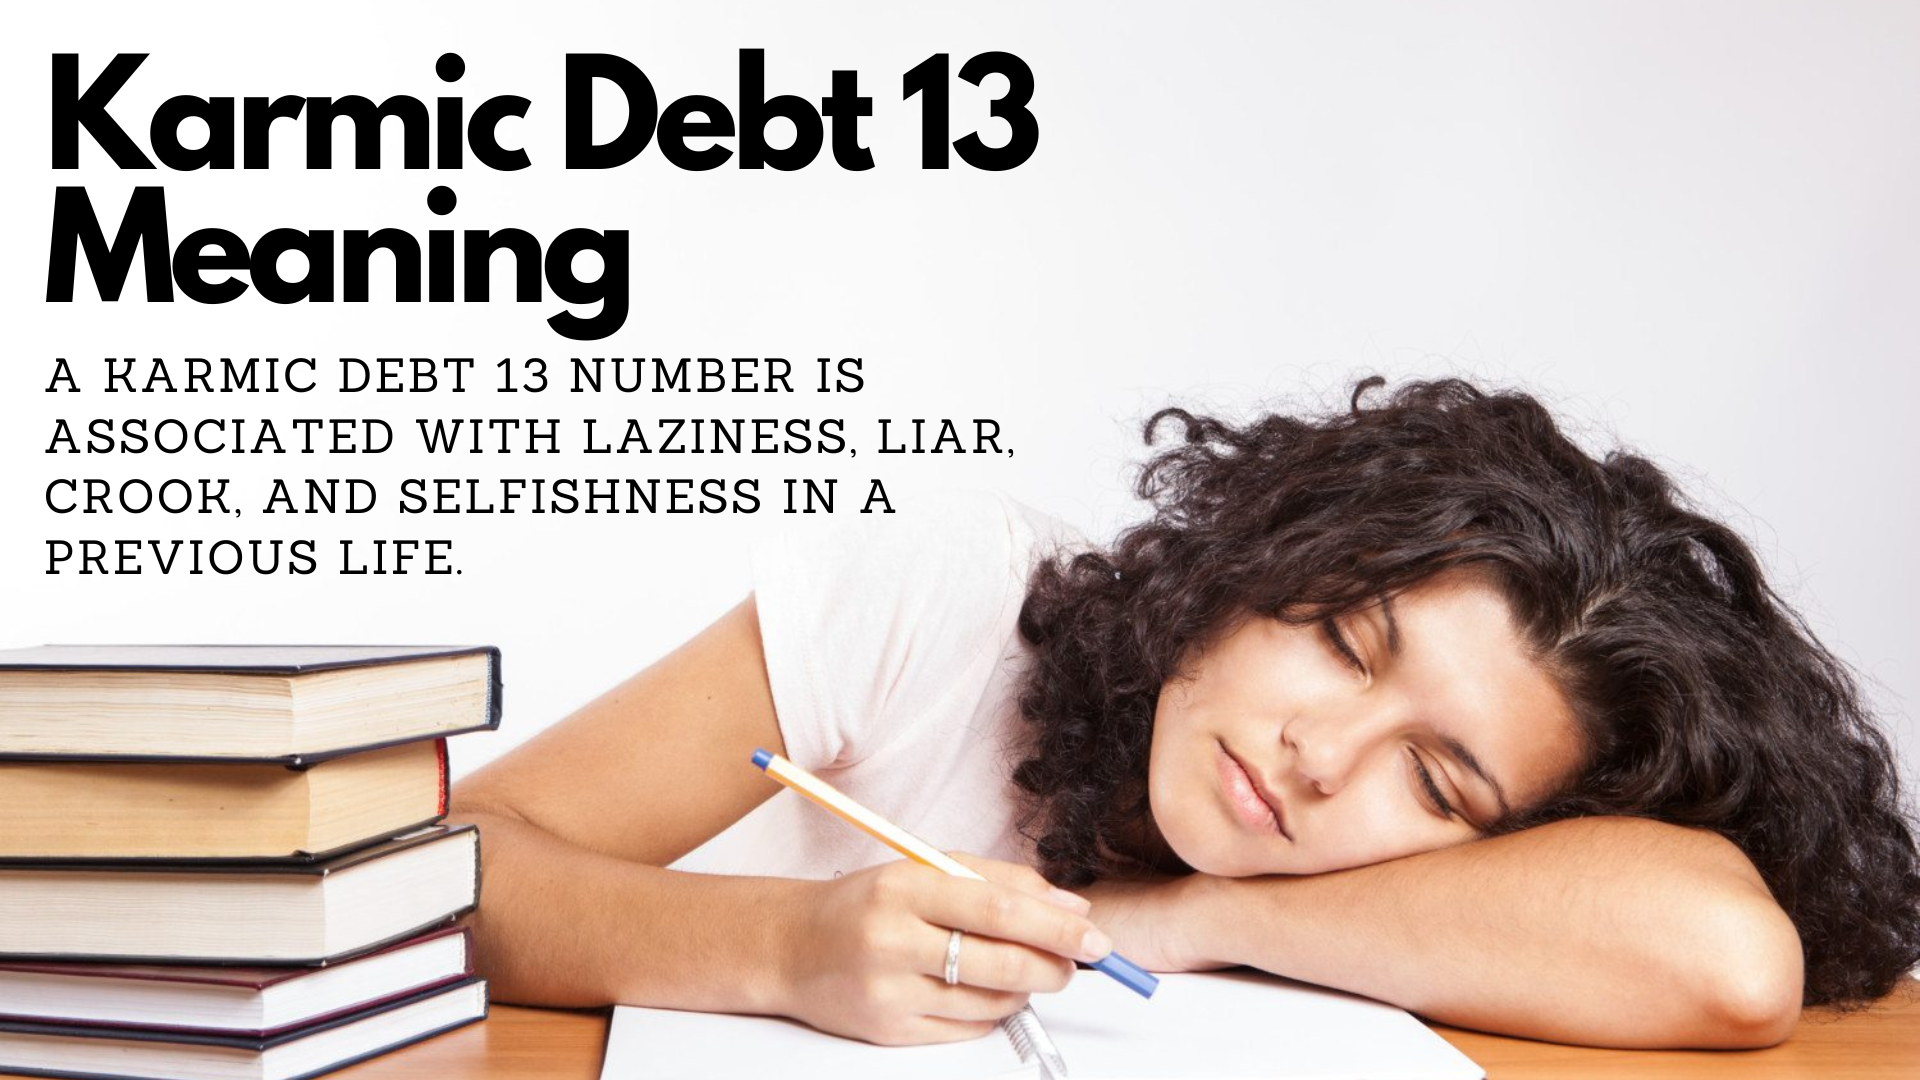 A sleeping woman holding a pen with books beside her and Karmic Debt 13 Meaning text